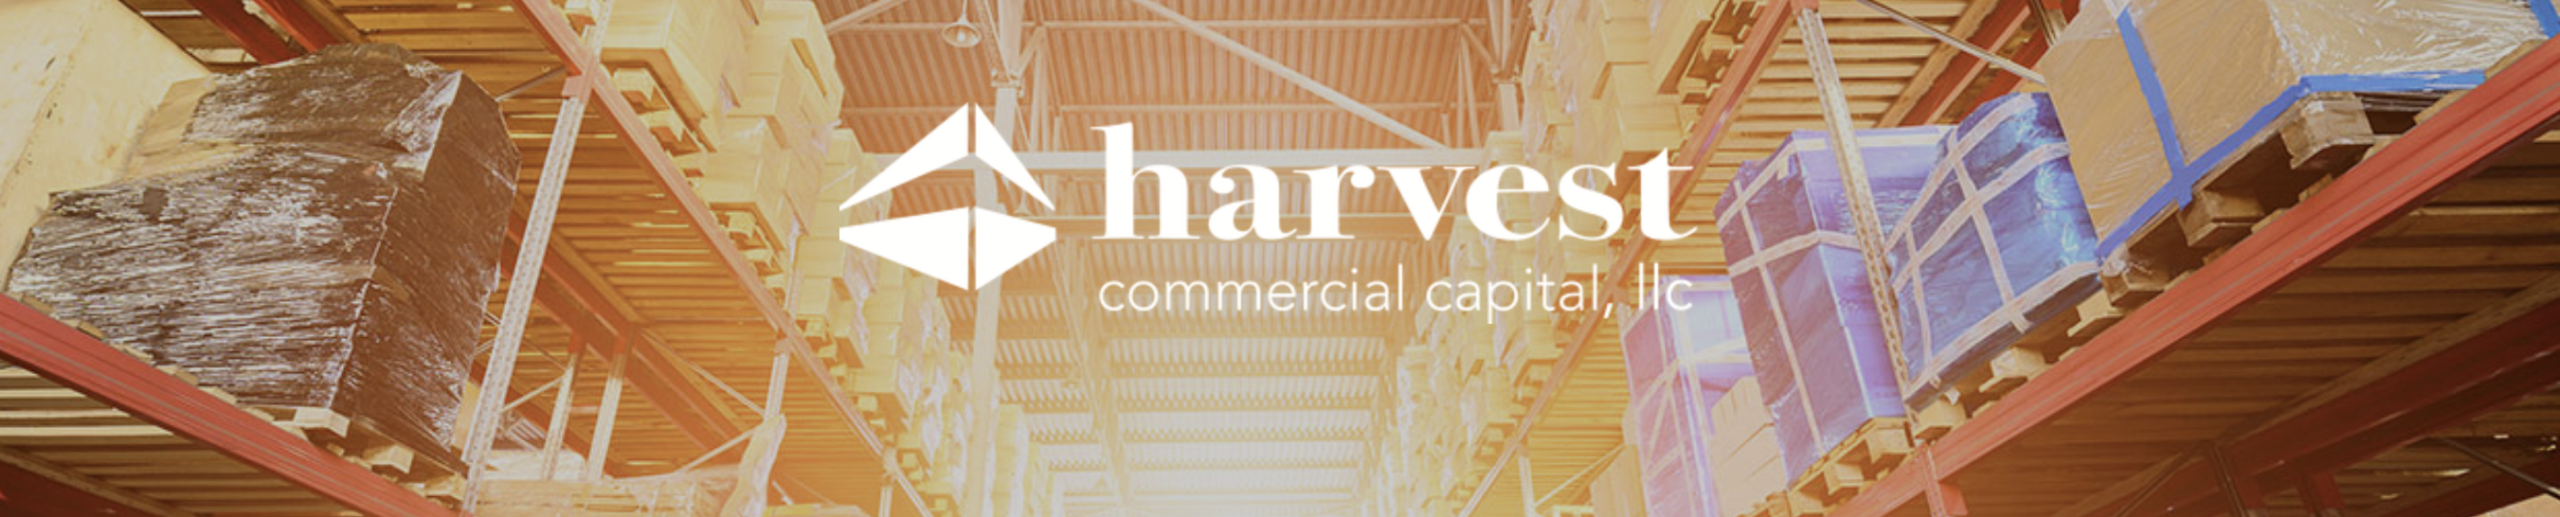 harvest-commercial-capital-llc-closes-its-first-securitization-of-owner-occupied-first-lien-sba-504-loans-and-conventional-real-estate-loans-266-6-million-of-offered-certificates-rated-by-kr